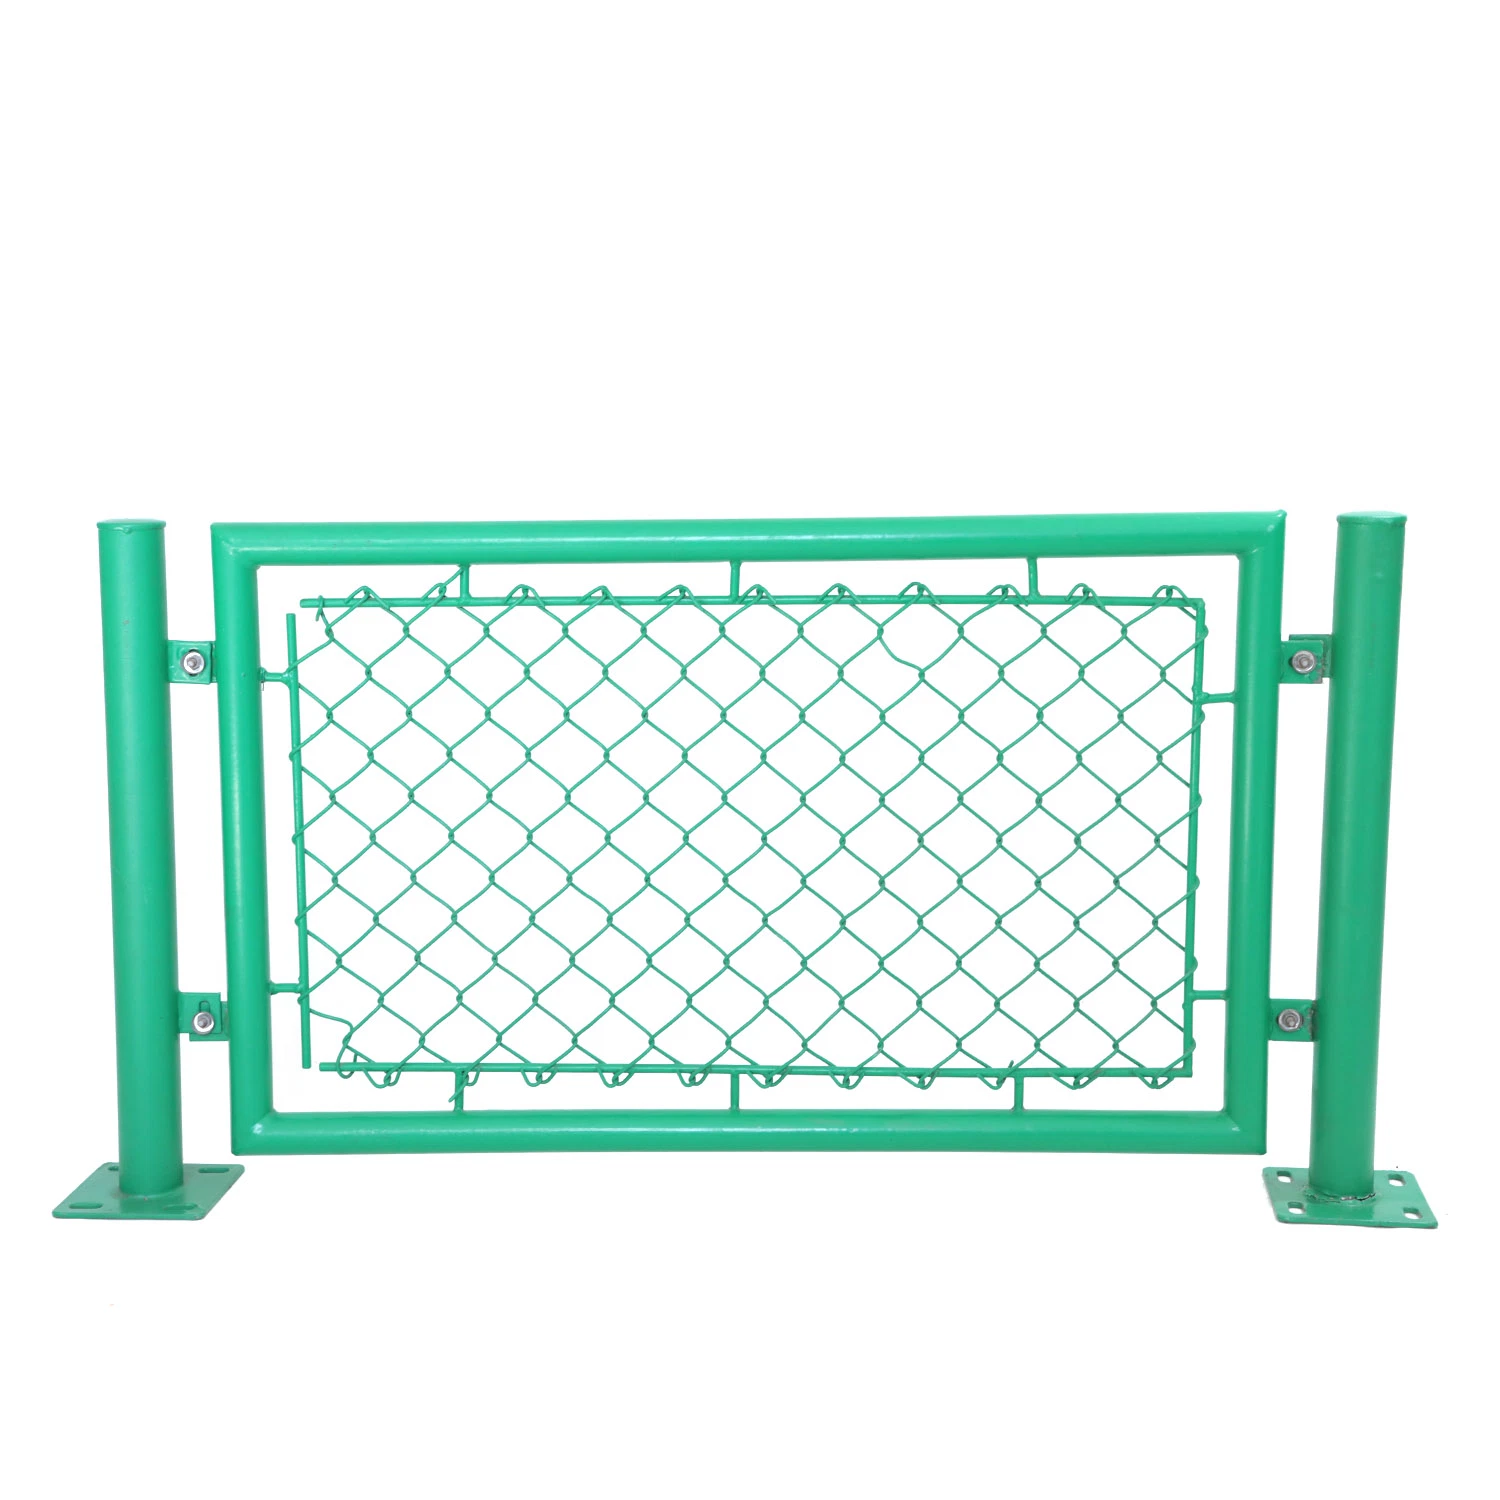 PVC Coated Curvy Mesh Fence/ Farm Fence /Wire Mesh/Chain Link Fence/Stainless Steel Wire Mesh/Field Fence/Garden Fence/Galvanized Chain Link Fence